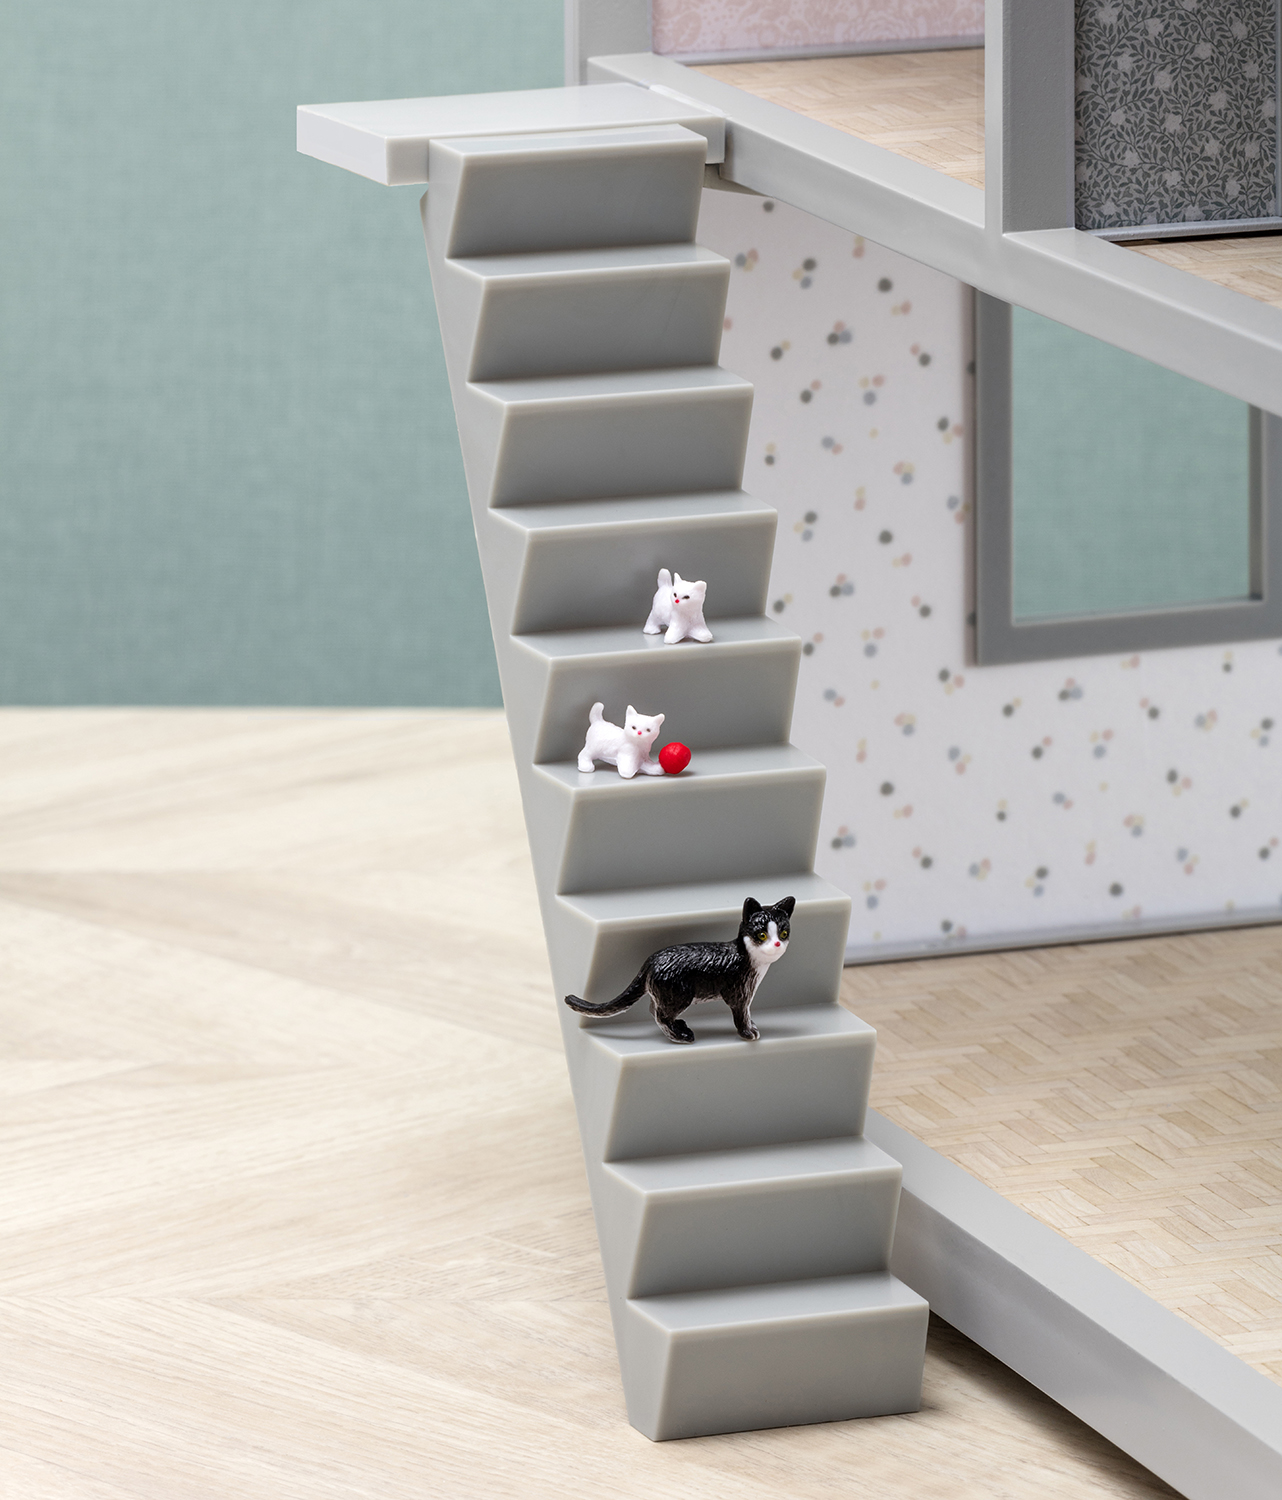 Lundby lundby doll house staircase